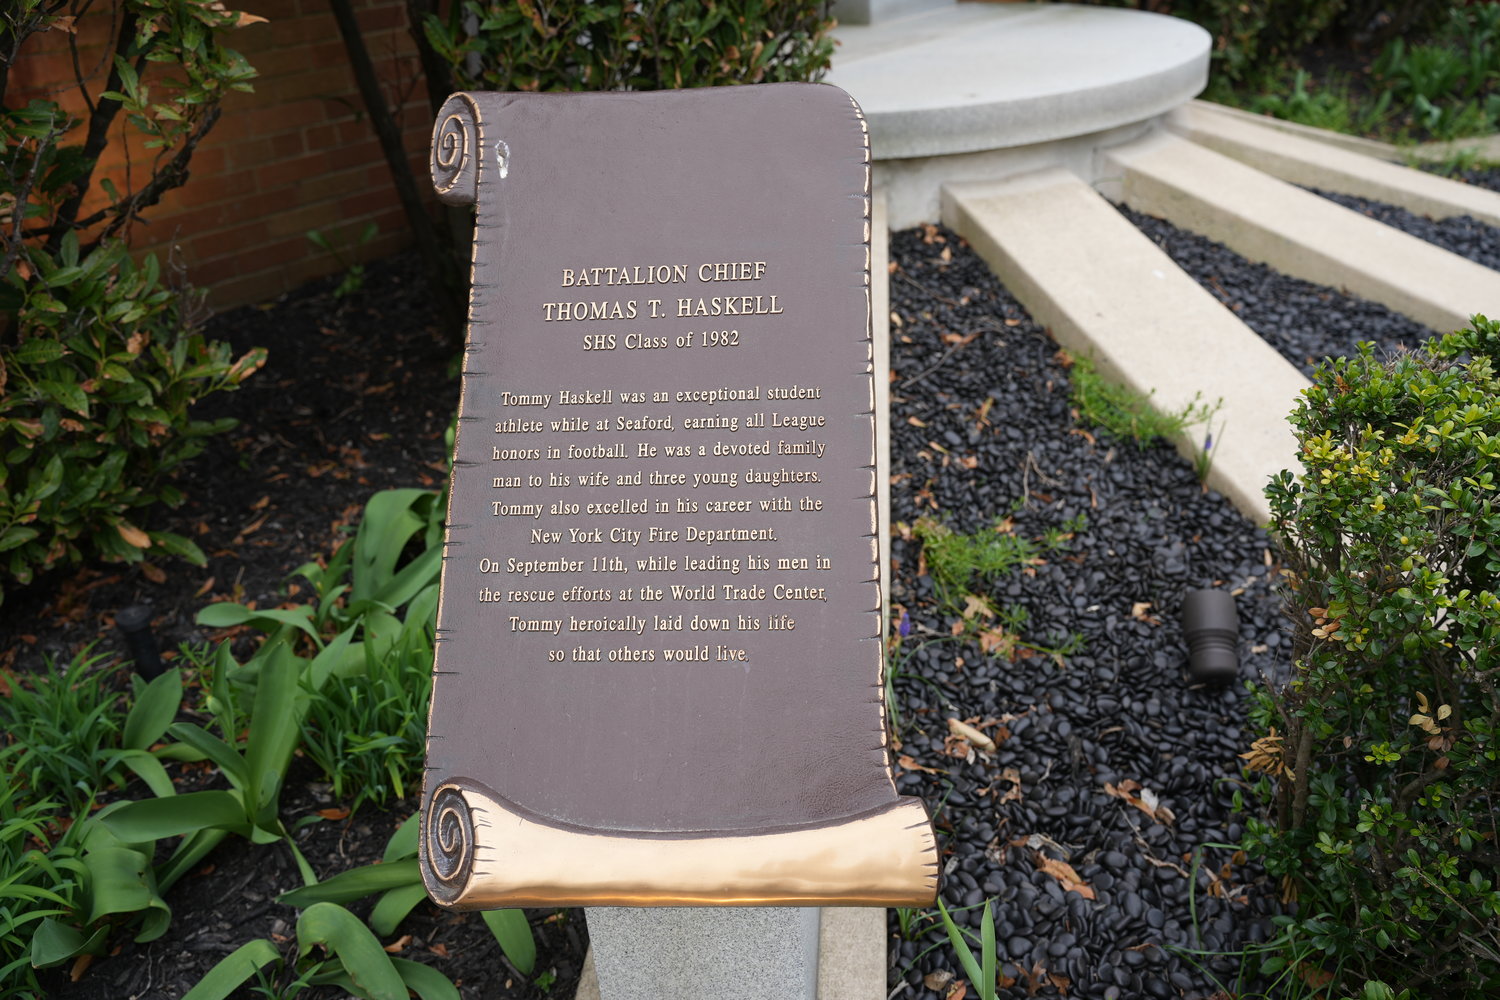 The memorial, which Joe Mottola helped create, is at Seaford High School. It features remembrances of all five alumni the school lost on 9/11.